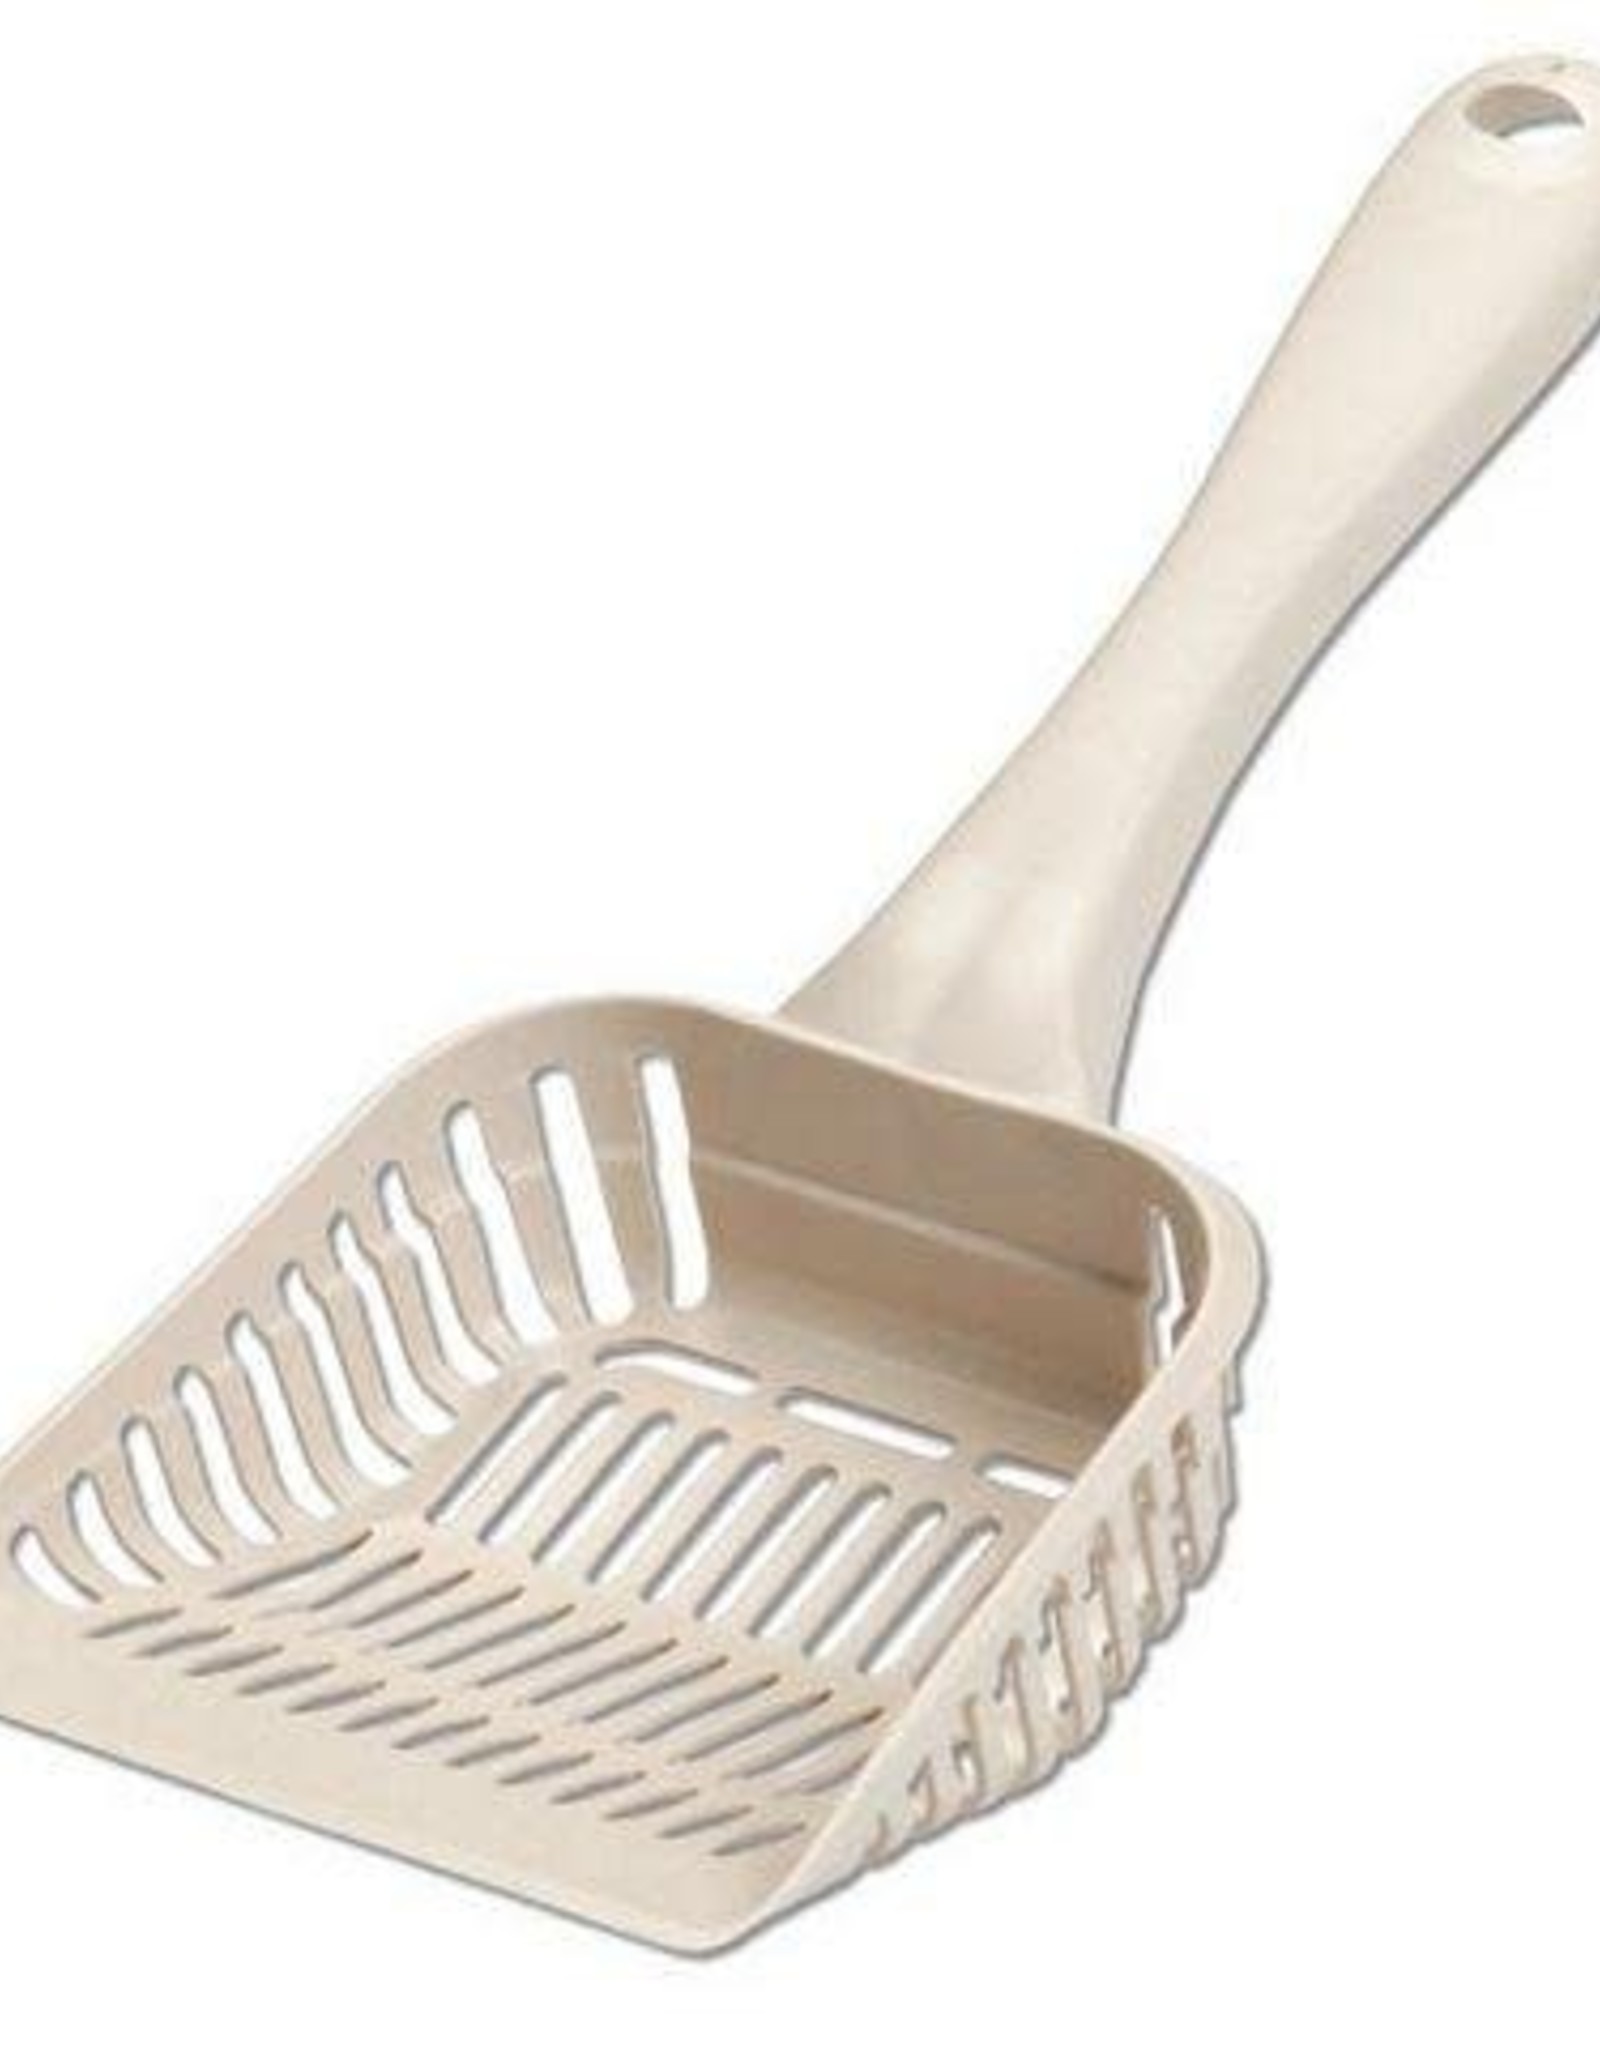 DOSK LITTER SCOOP GIANT by Petmate